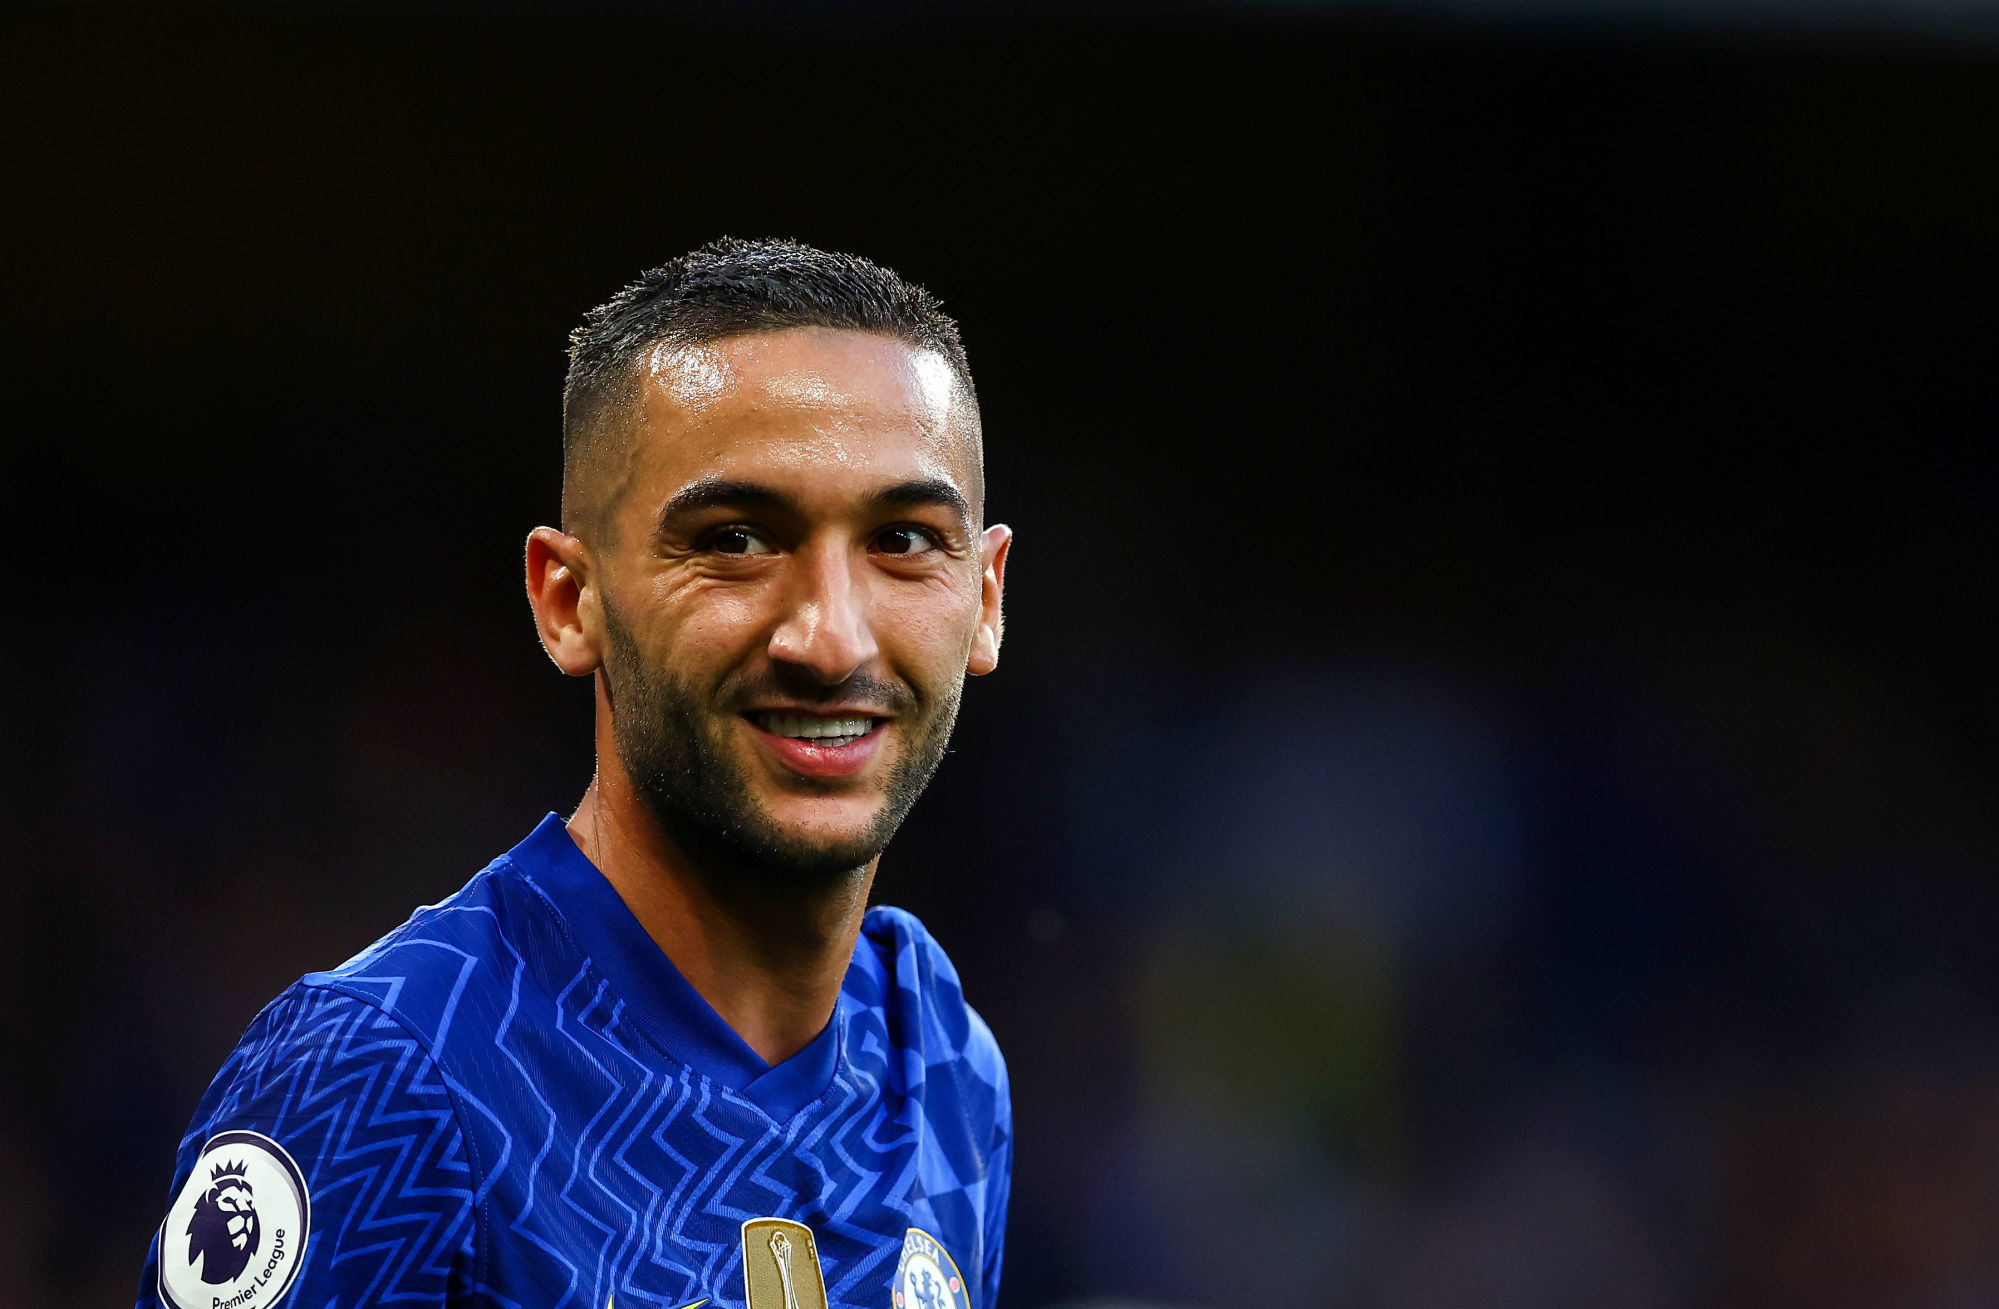 Hakim Ziyech coveted by OM